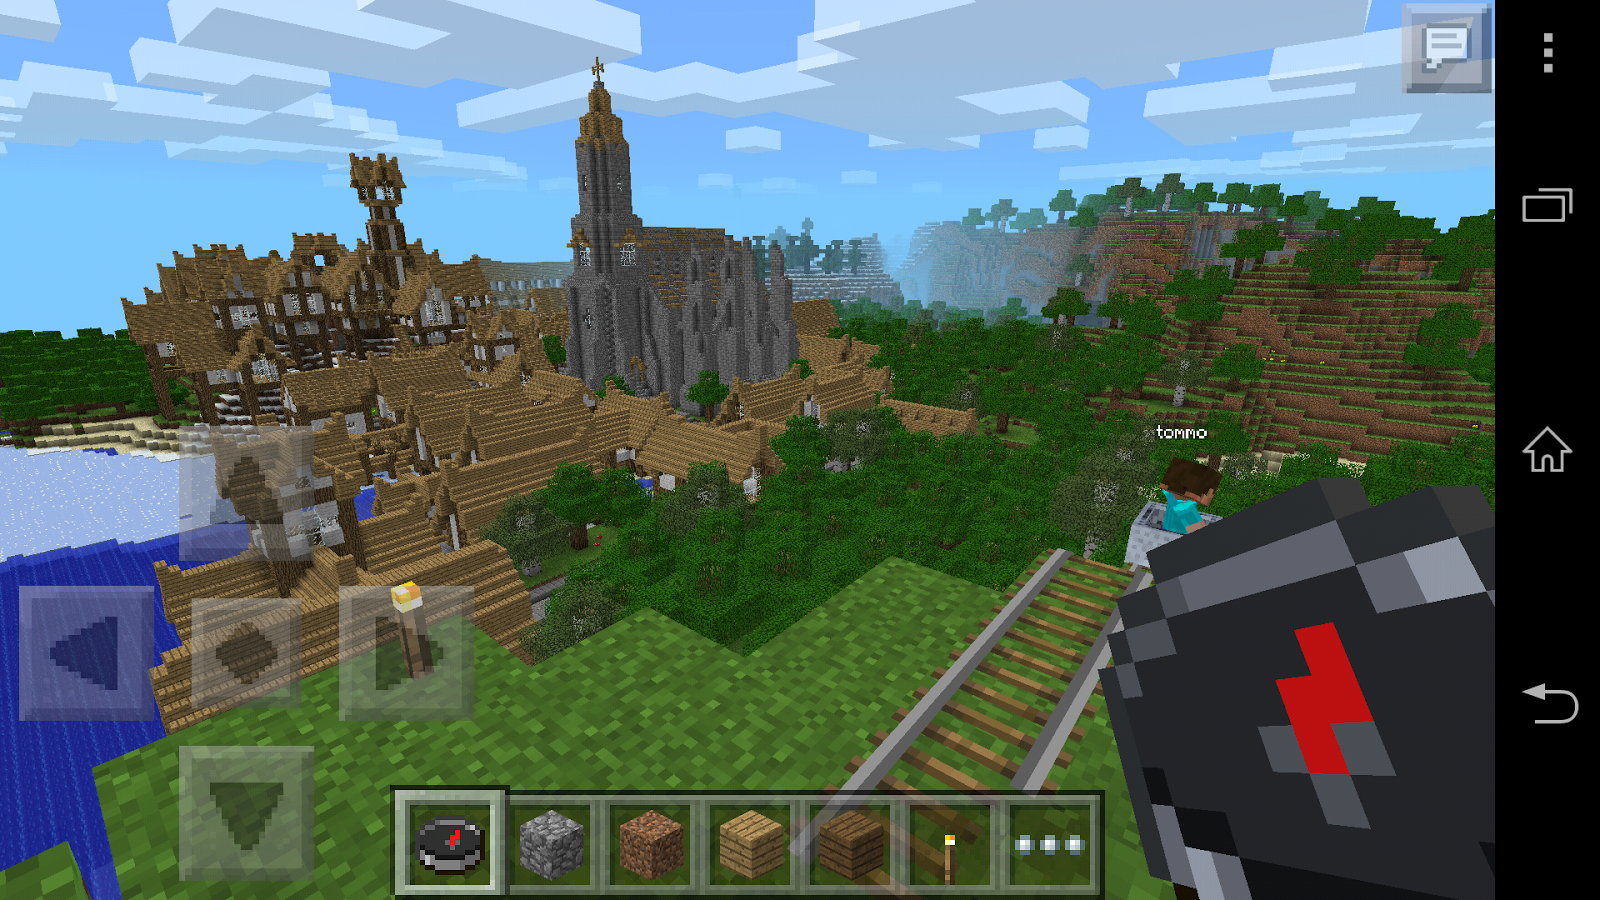 Minecraft: Pocket Edition is Out Now For Windows Phone